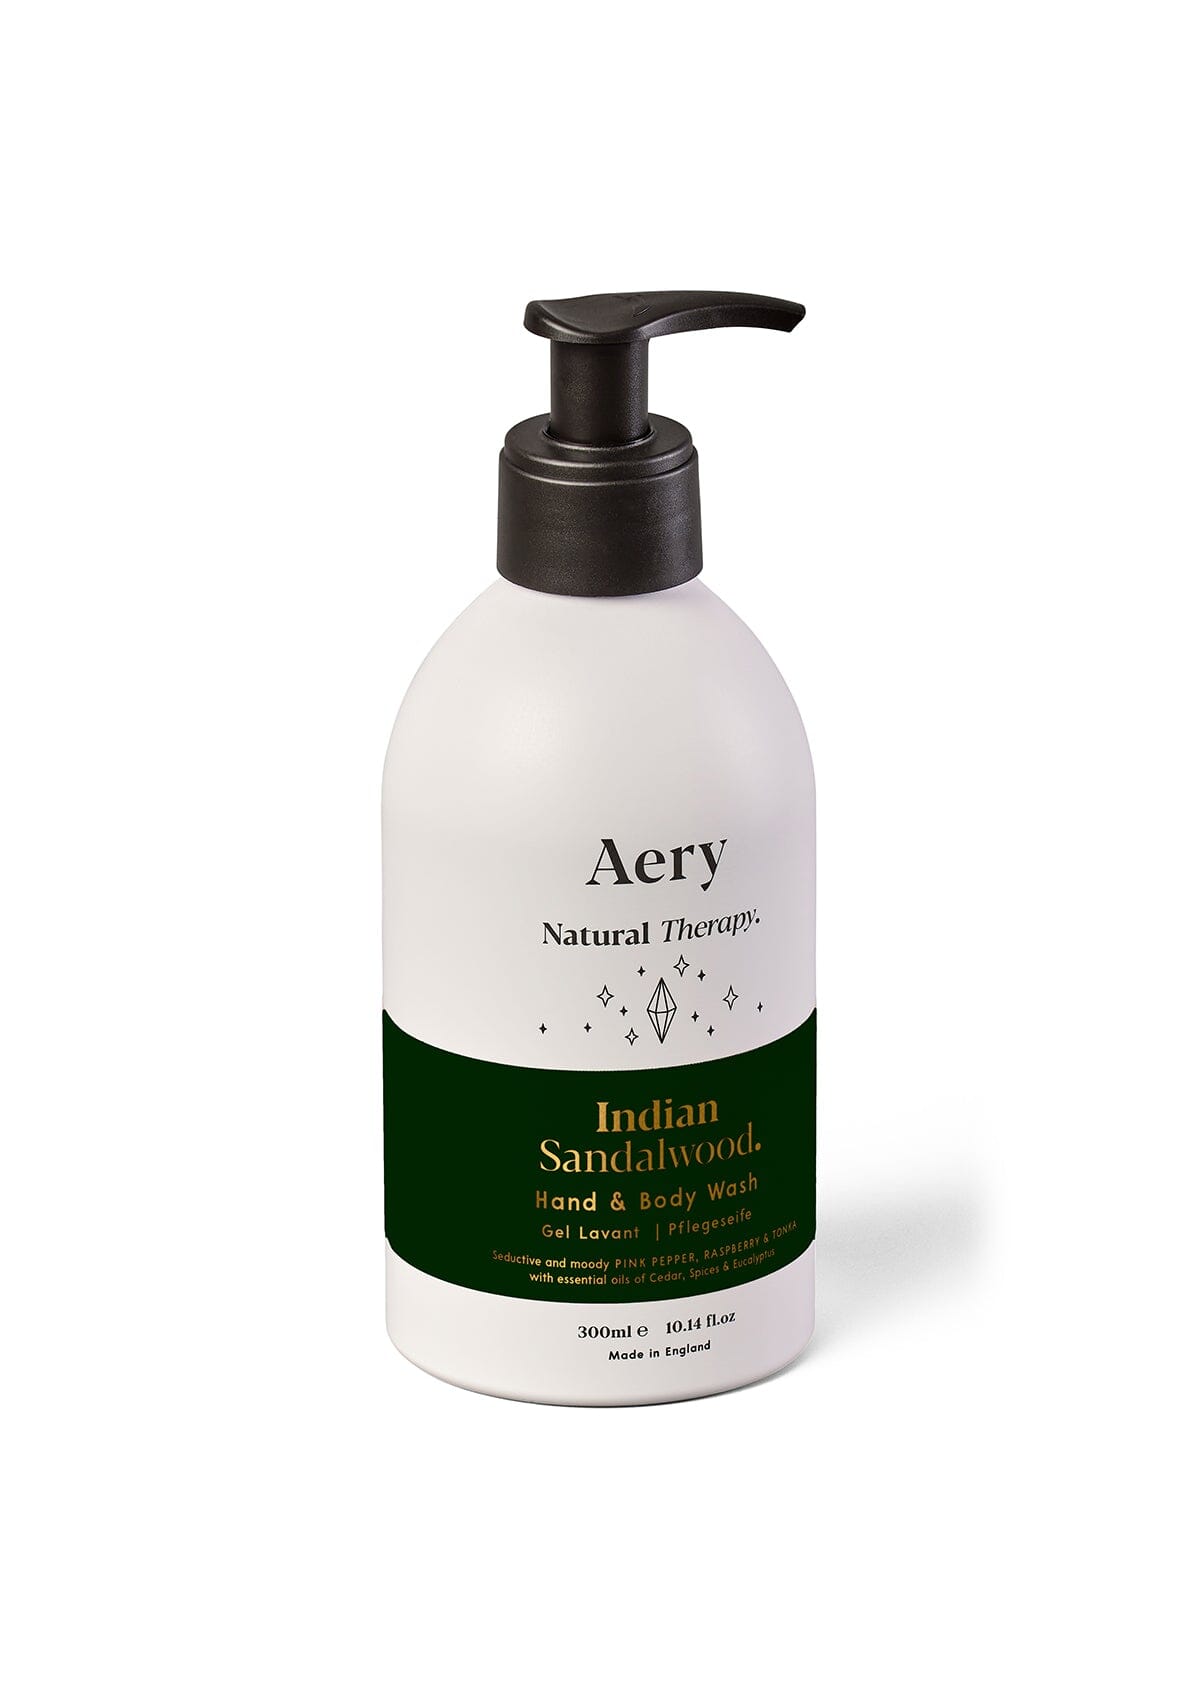 Black Indian Sandalwood Hand and Body Wash by Aery displayed on white background